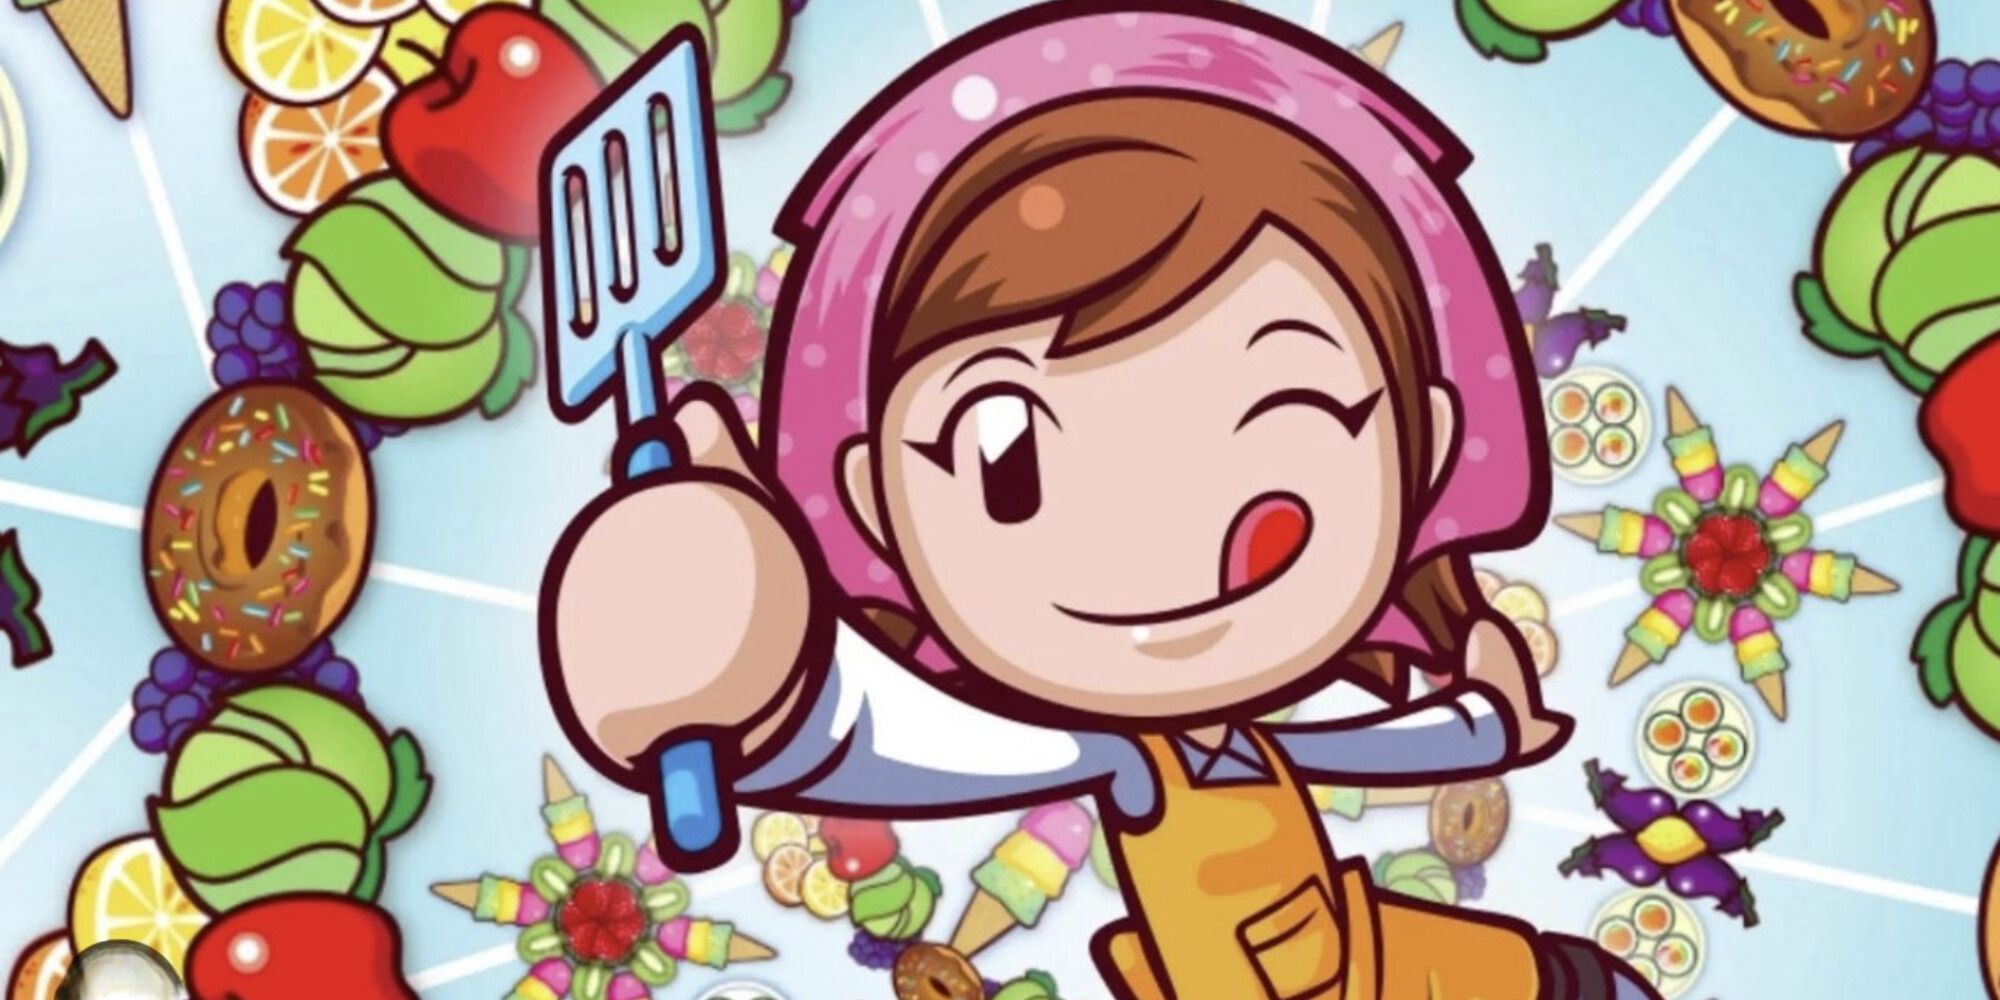 The title character from Cooking Mama surrounded by different cooking ingredients